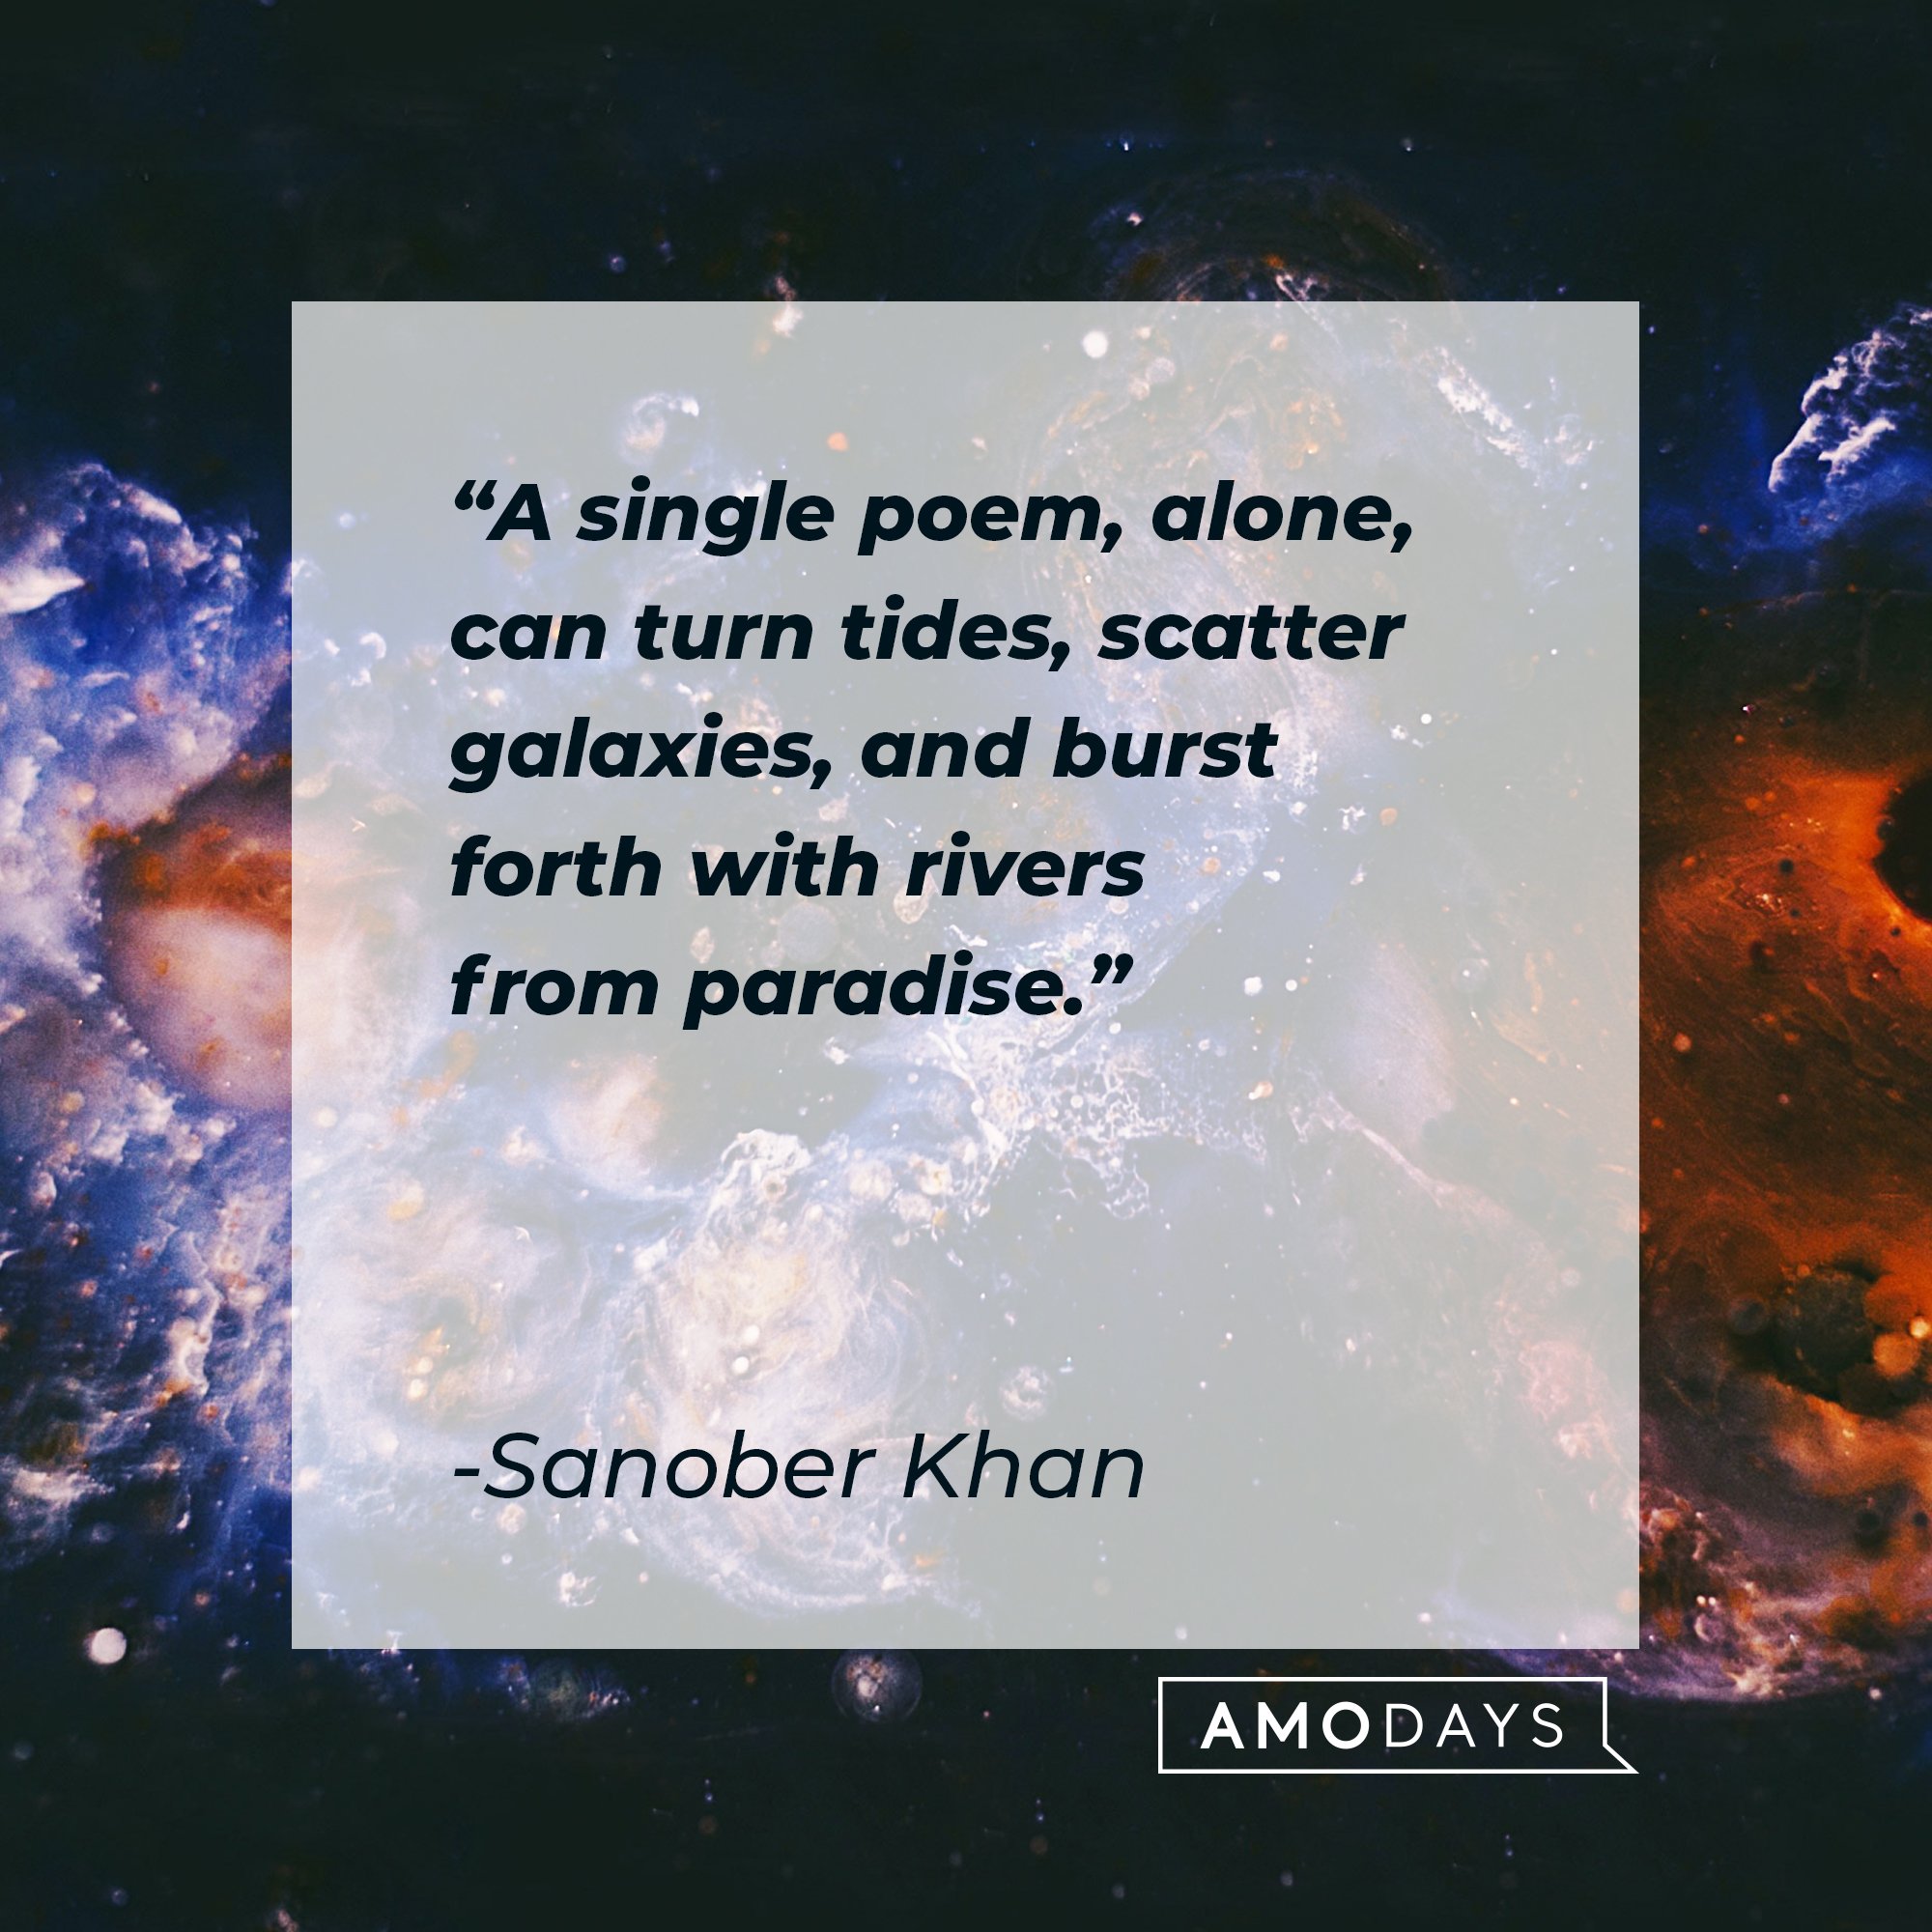 Sanober Khan’s quote: "A single poem, alone, can turn tides, scatter galaxies, and burst forth with rivers from paradise." | Image: AmoDays